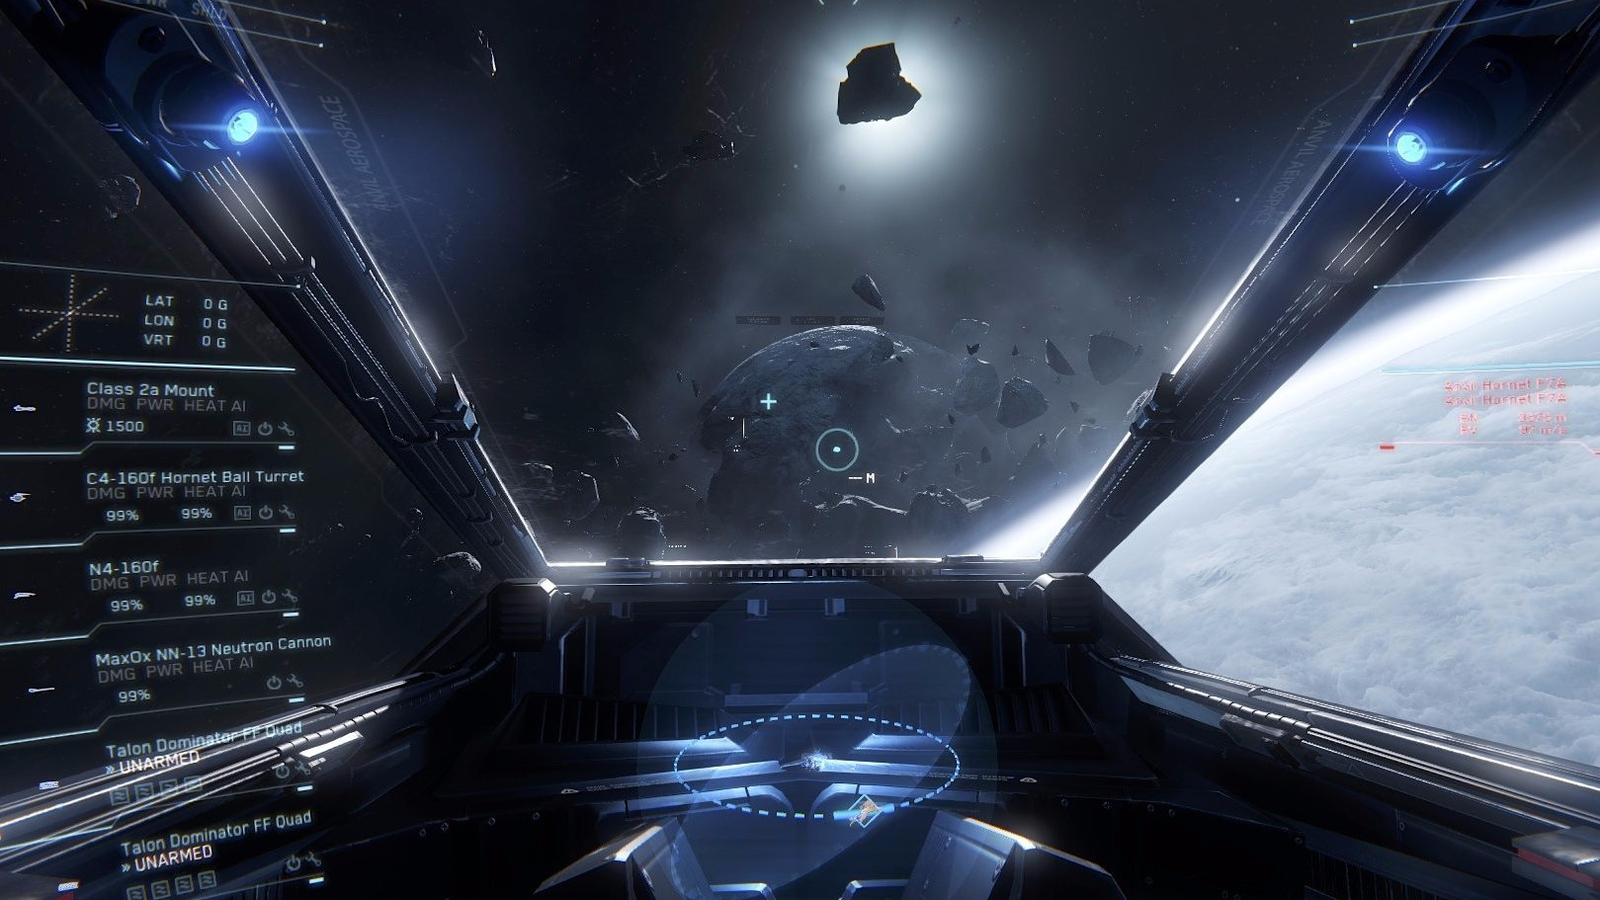 Star Citizen's client expected to be around 100GB